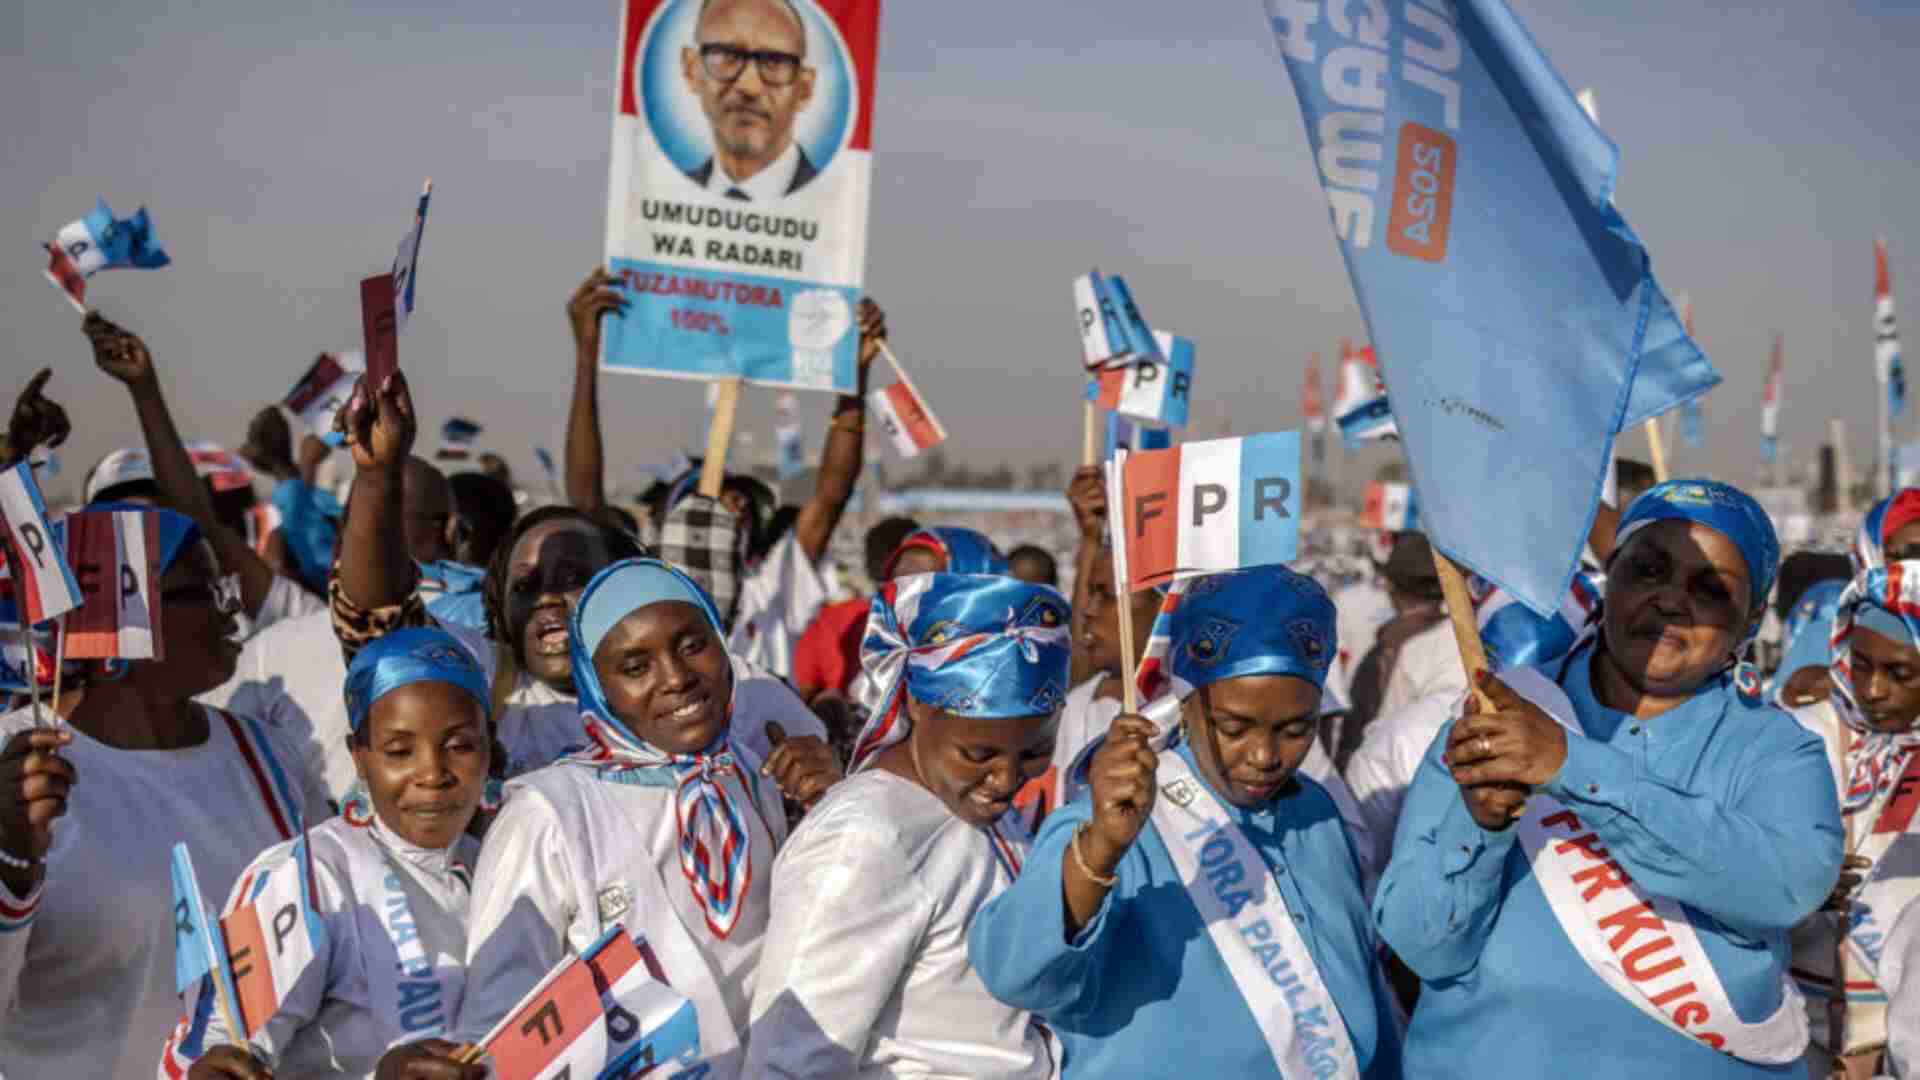 Rwanda Heads To Polls With Kagame Ready For Fourth Term